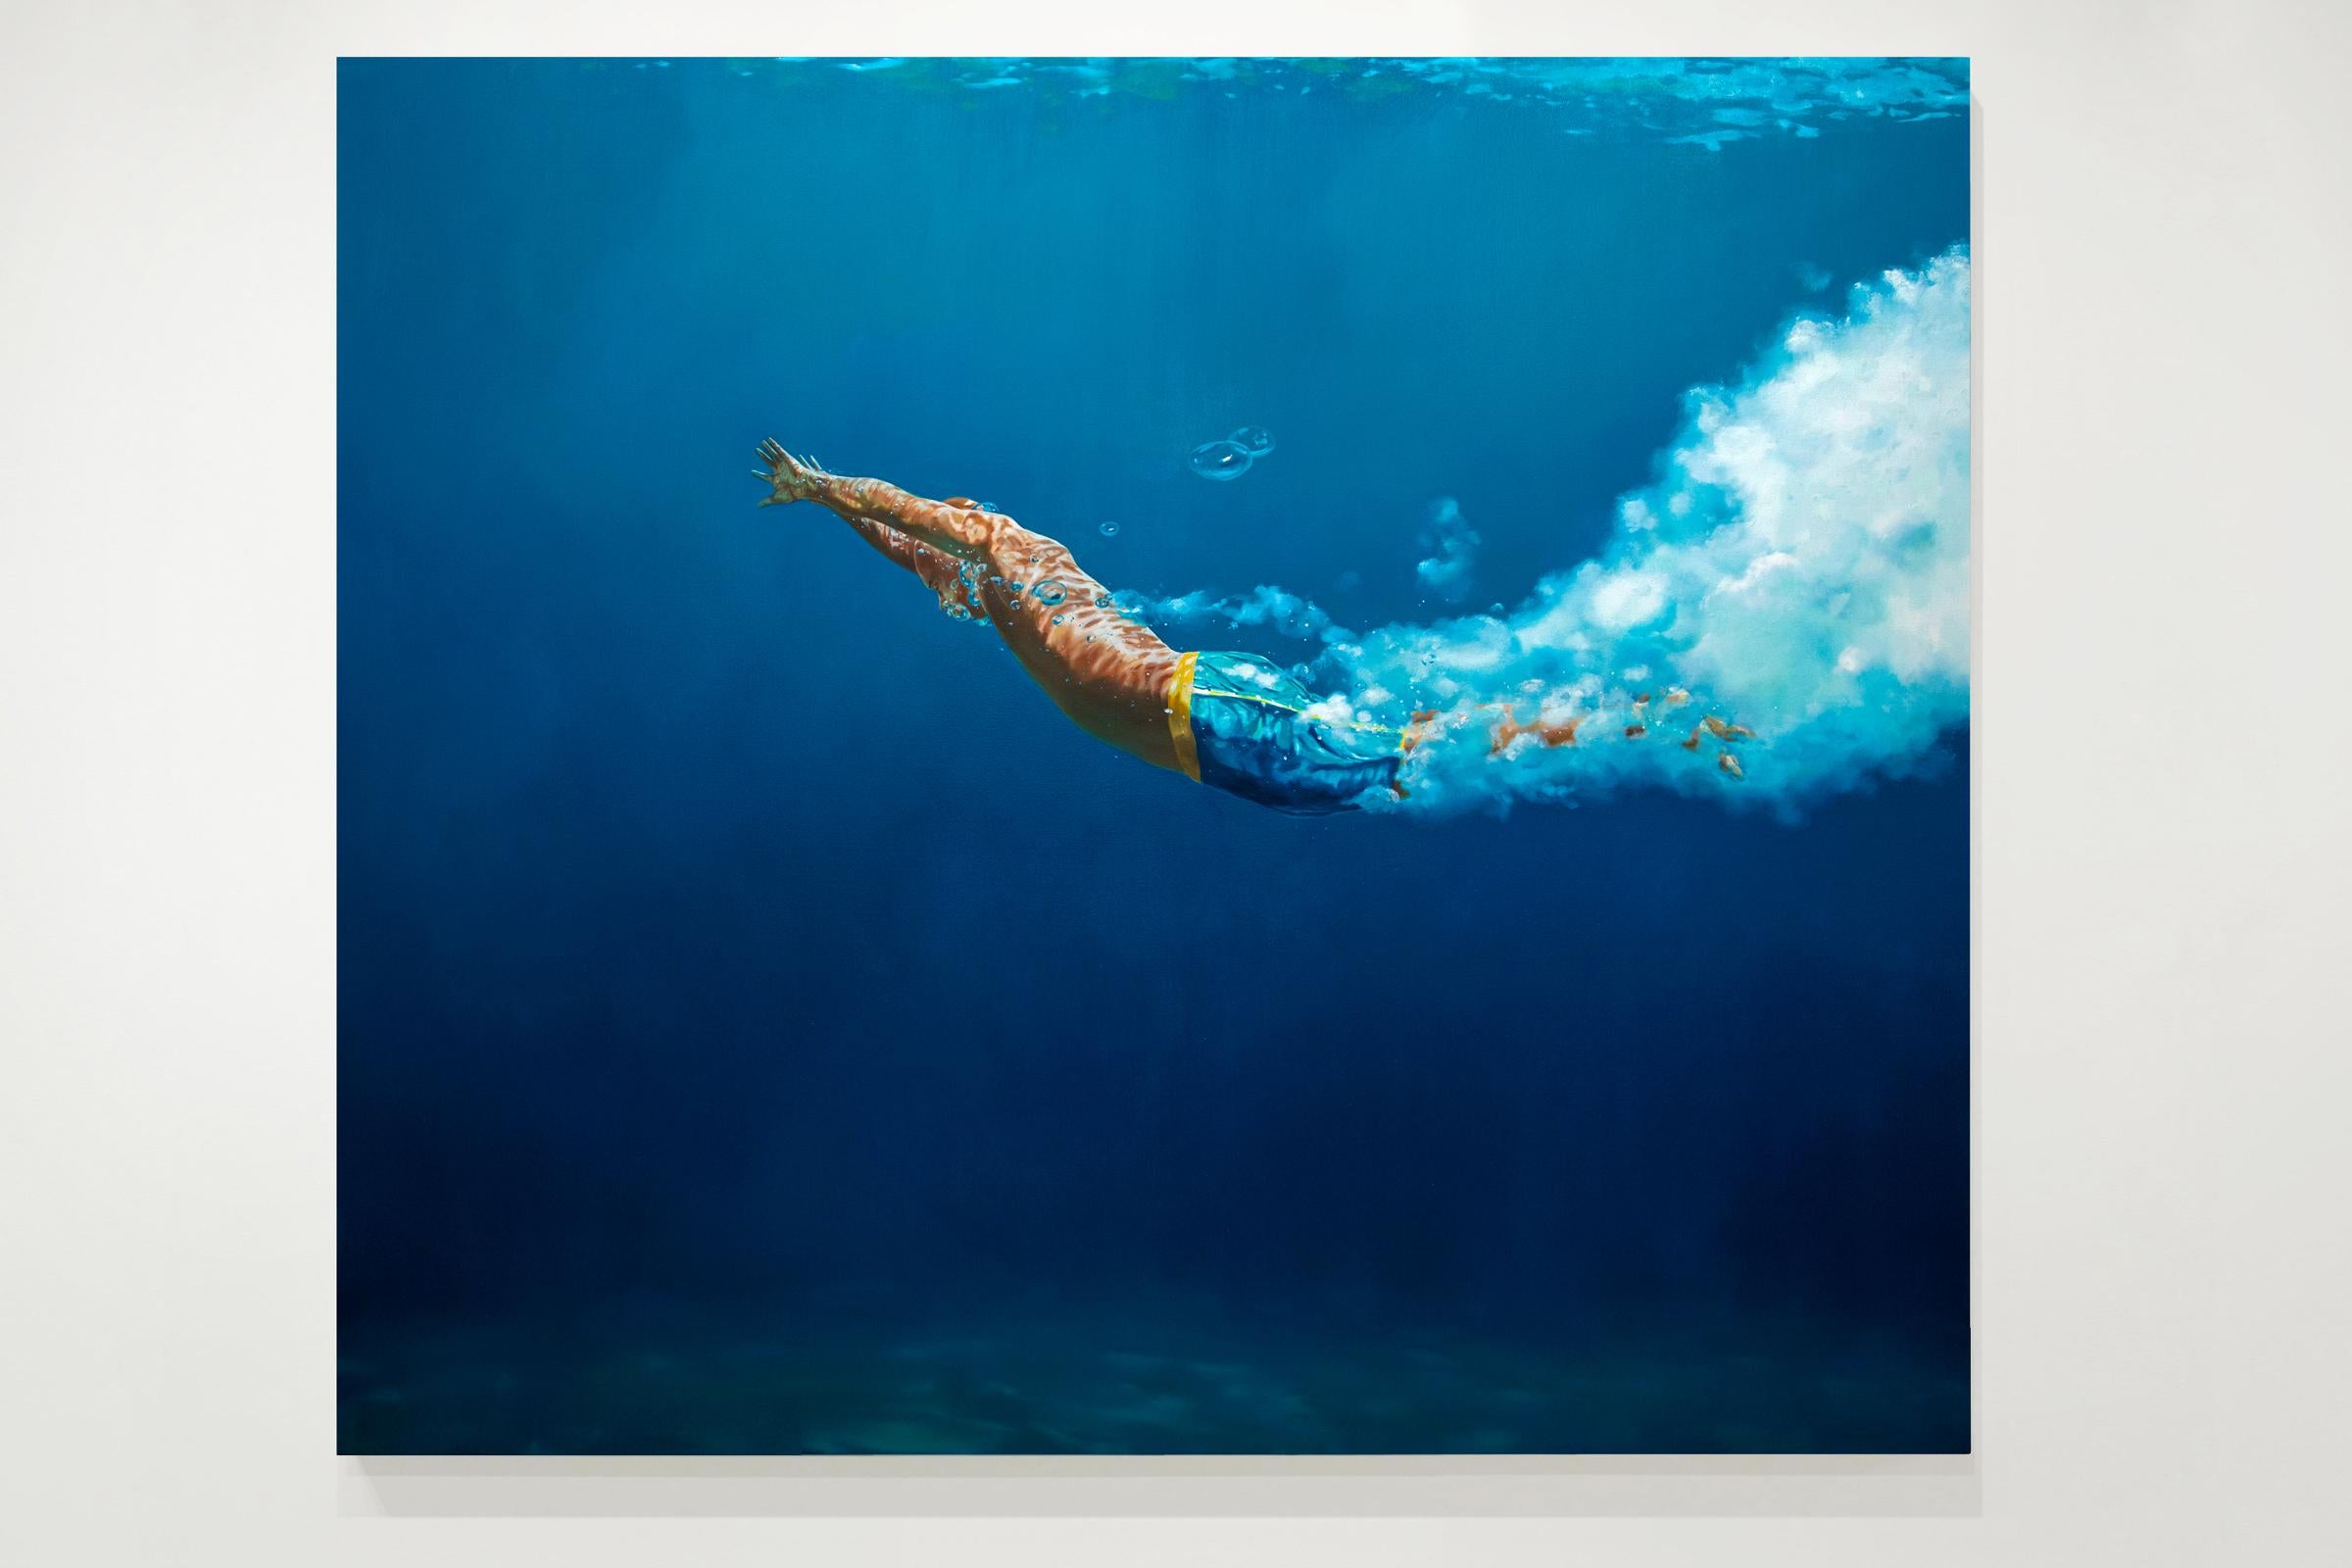 SELF - Contemporary Realism / Swimmer / Waterscape / Male Figure - Painting by Eric Zener